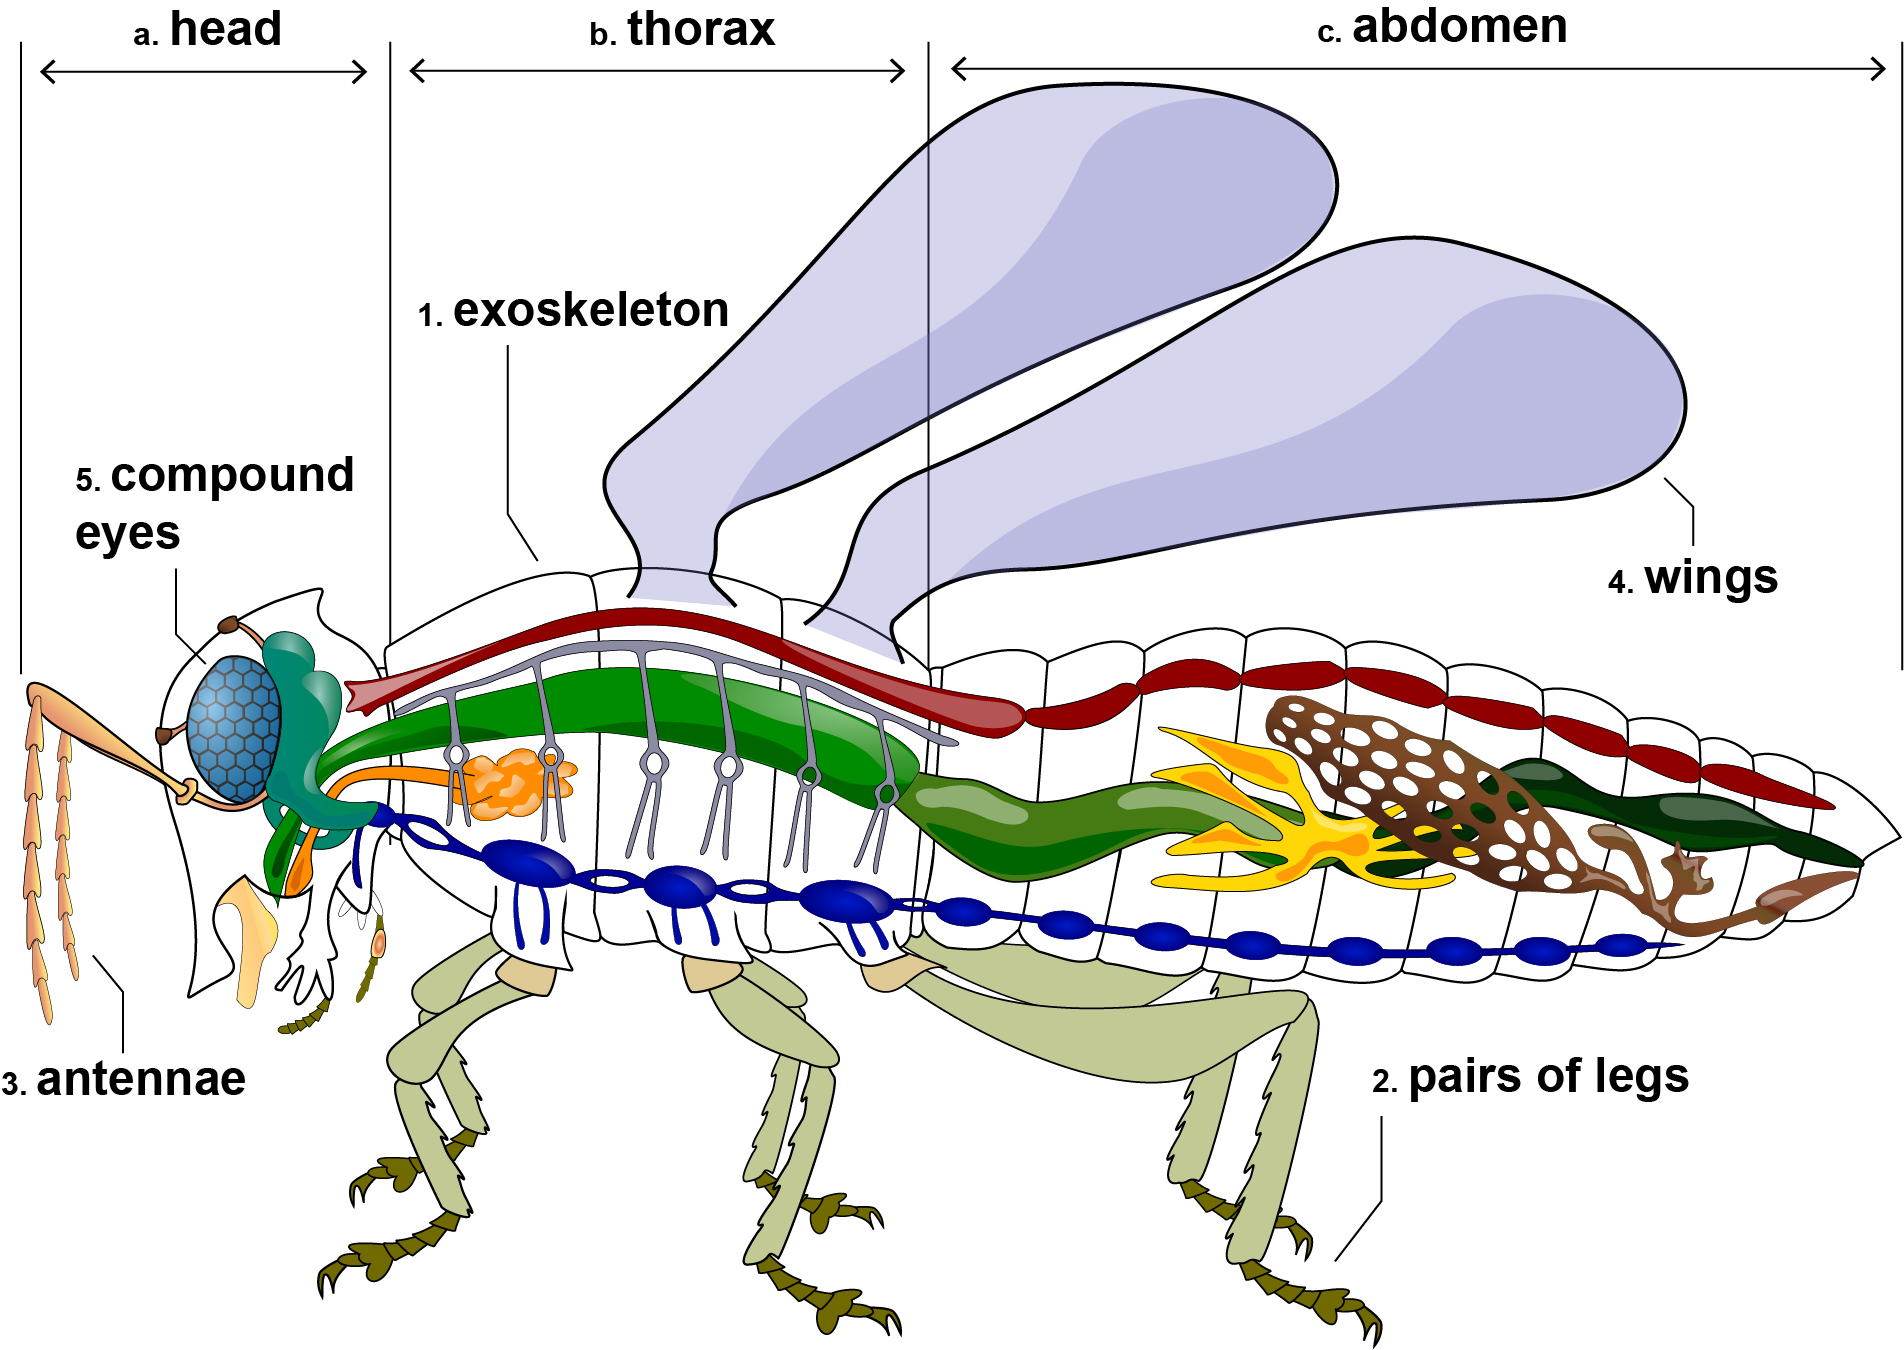 Anatomy of an insect, identifying the head (front portion), thorax (middle) and abdomen (back portion) of an insect. Labeled on the diagram are: 1) The exoskeleton, a solid dark outline; 2) three pairs of segmented legs; 3) Two long yellow, skinny antennae extending from the insect's head; 4) A set of two rounded wings on the insect's back; 5) Oval eyes made up of lots of small hexagonal parts.